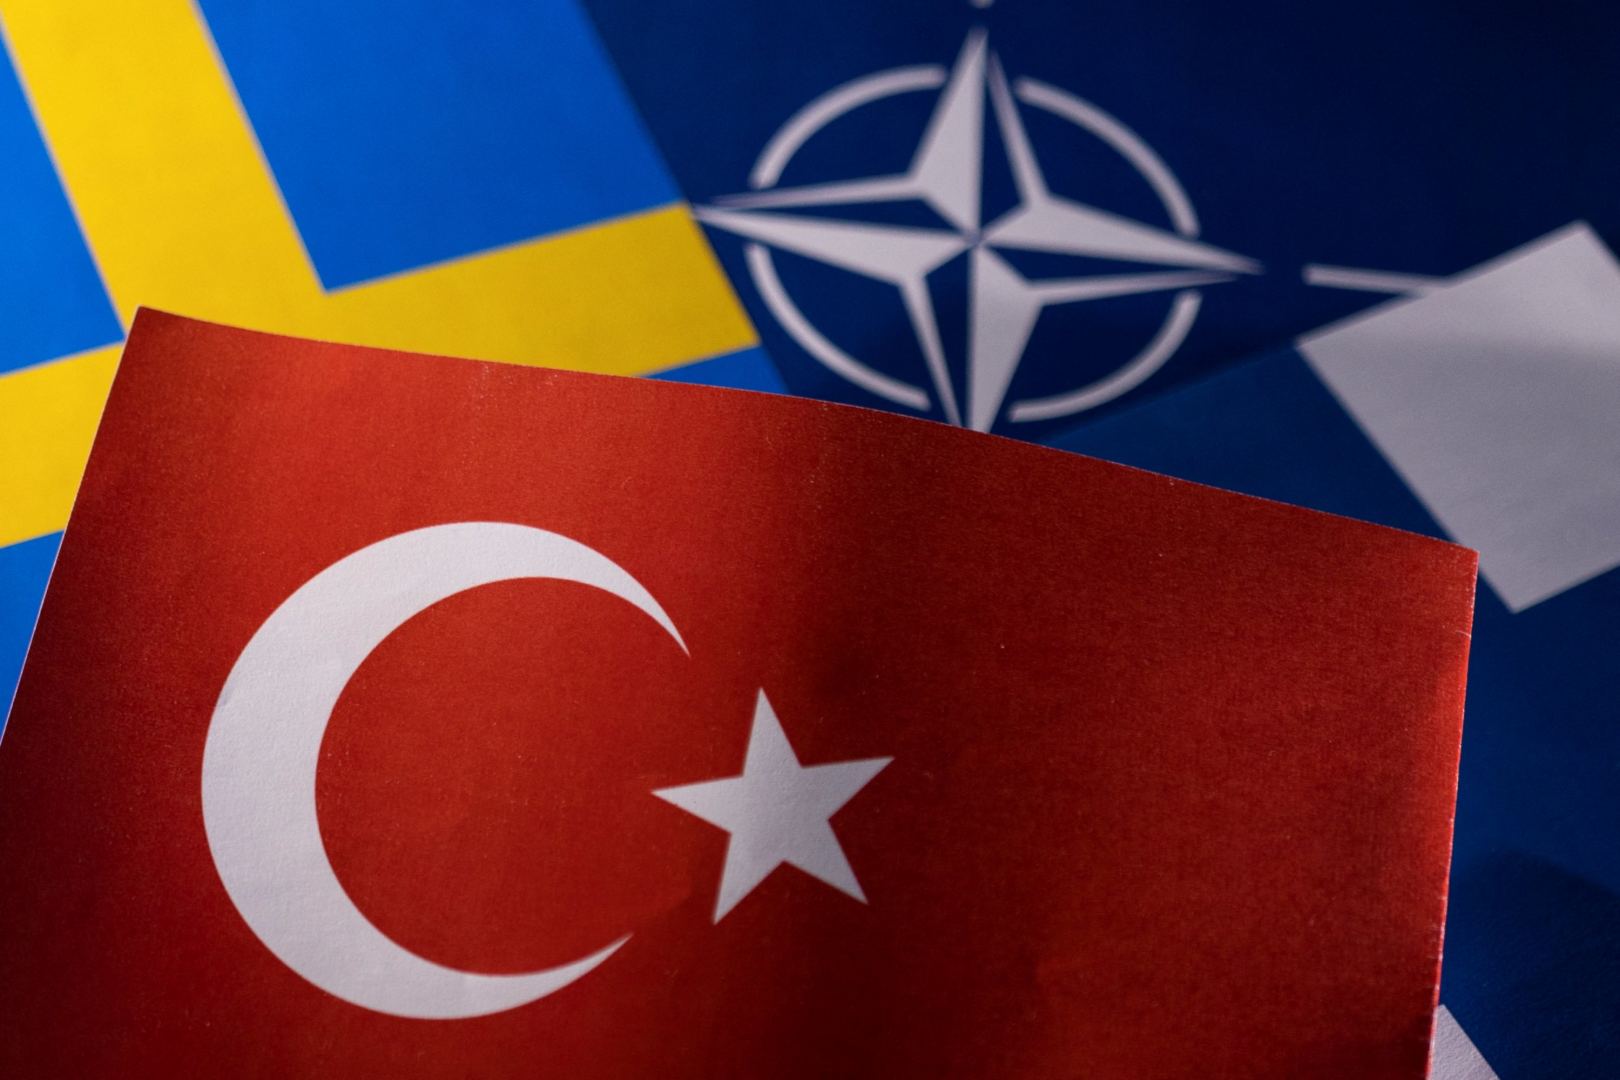 Talks on Sweden's and Finland's joining NATO postponed following request from Türkiye